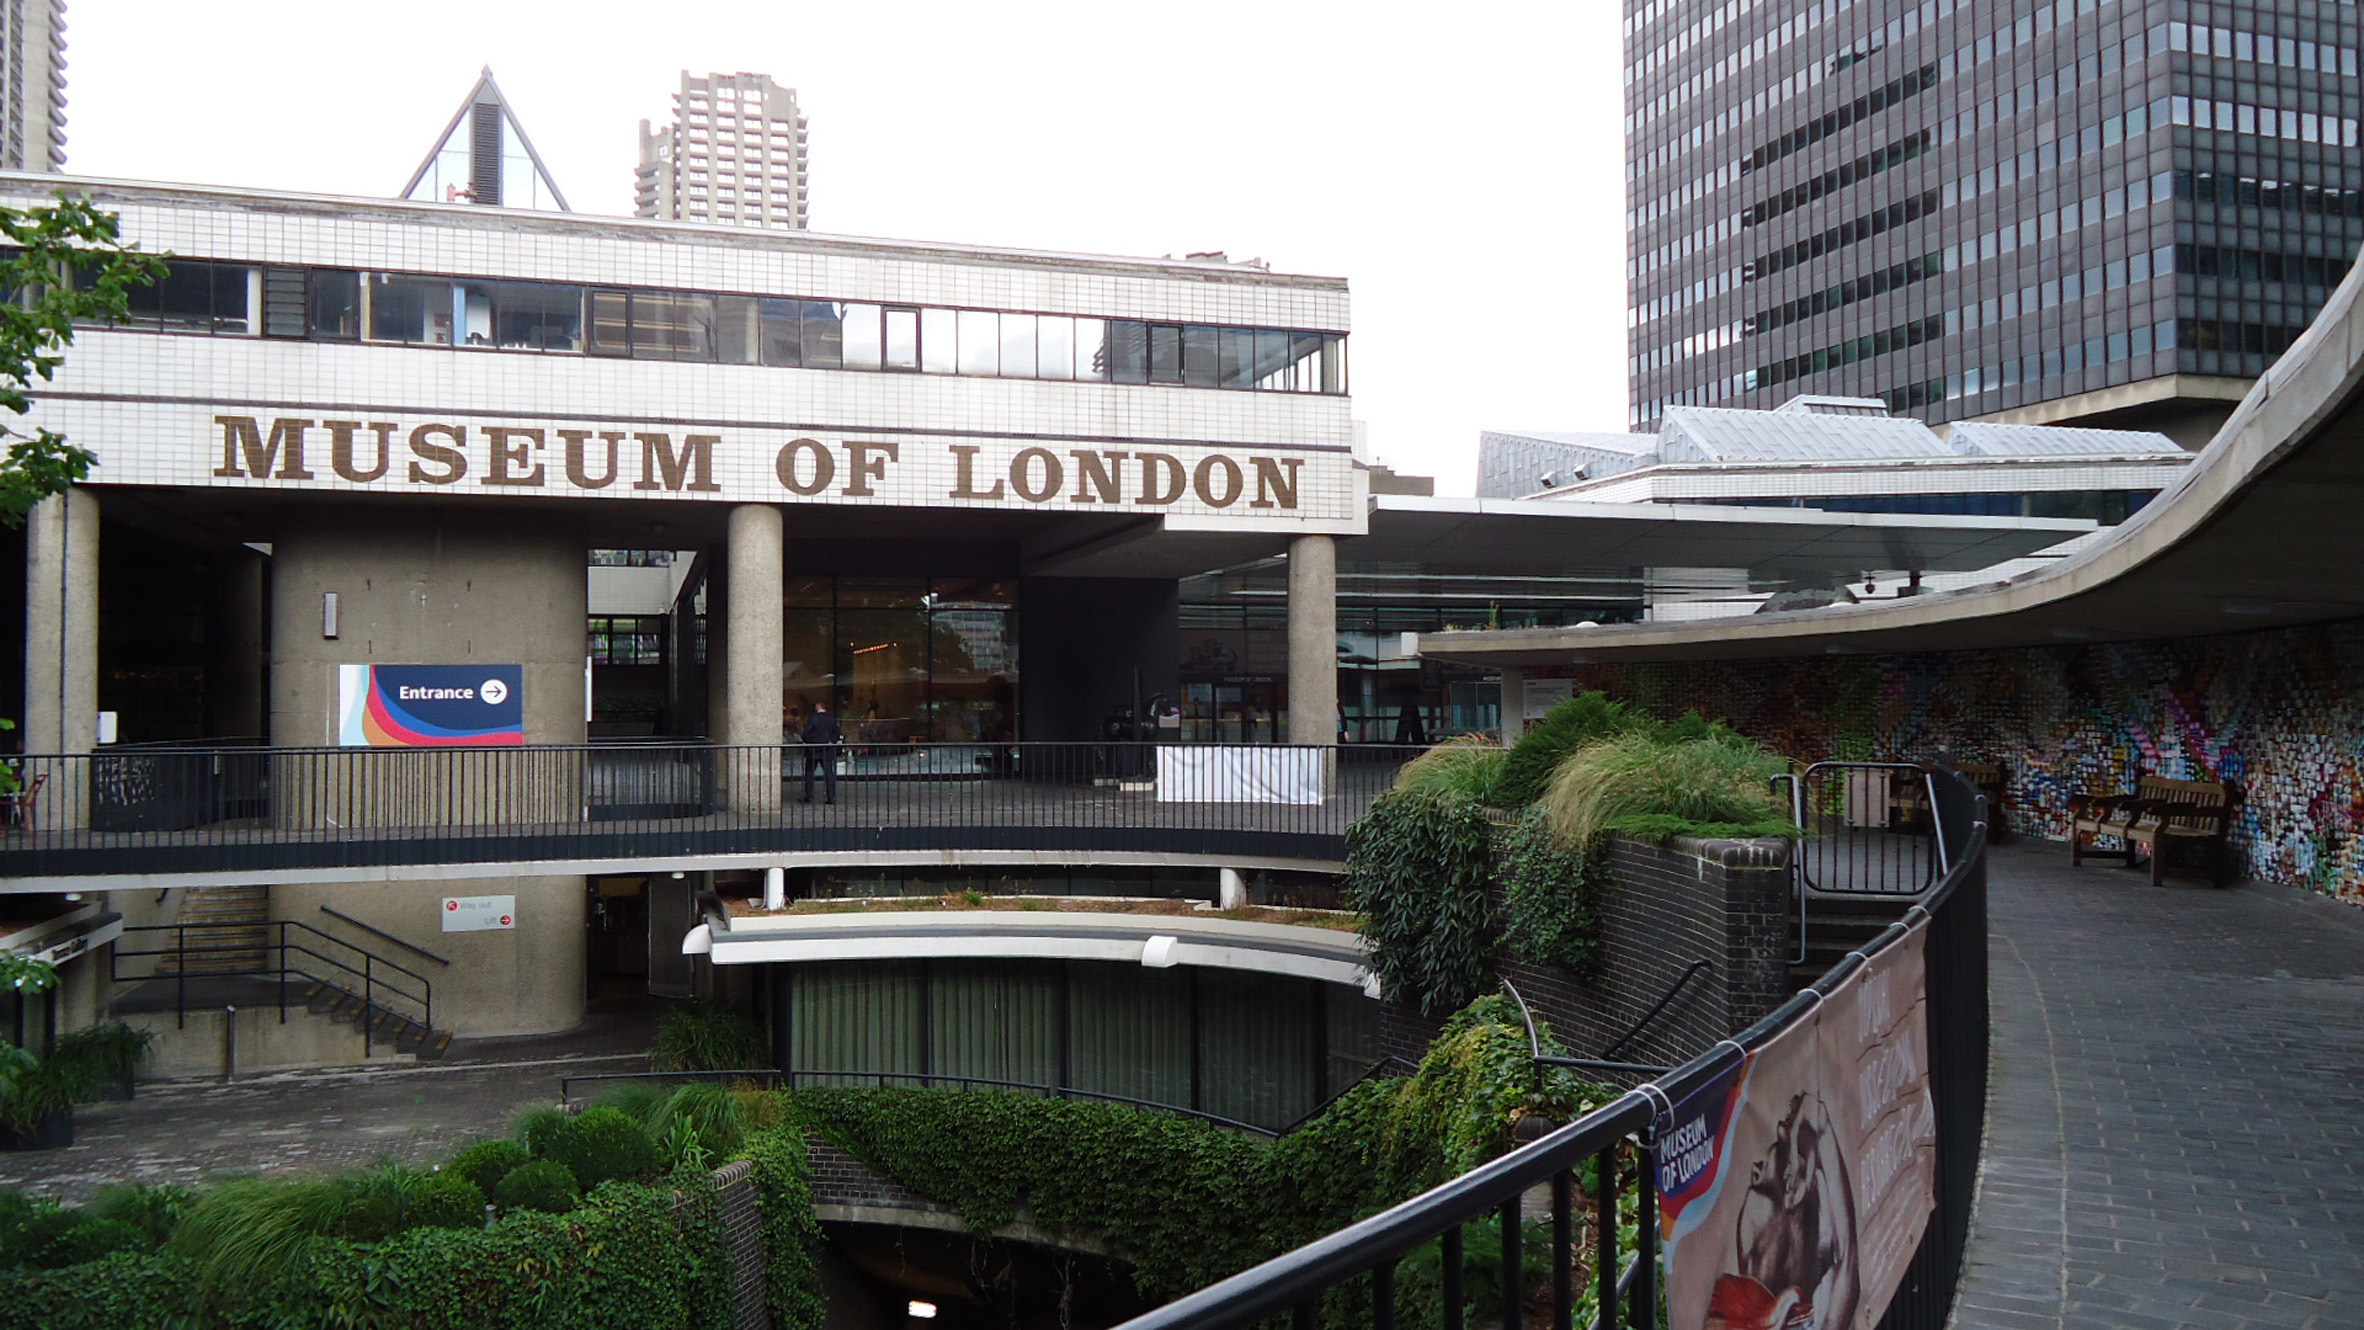 Museum of London on the Barbican estate